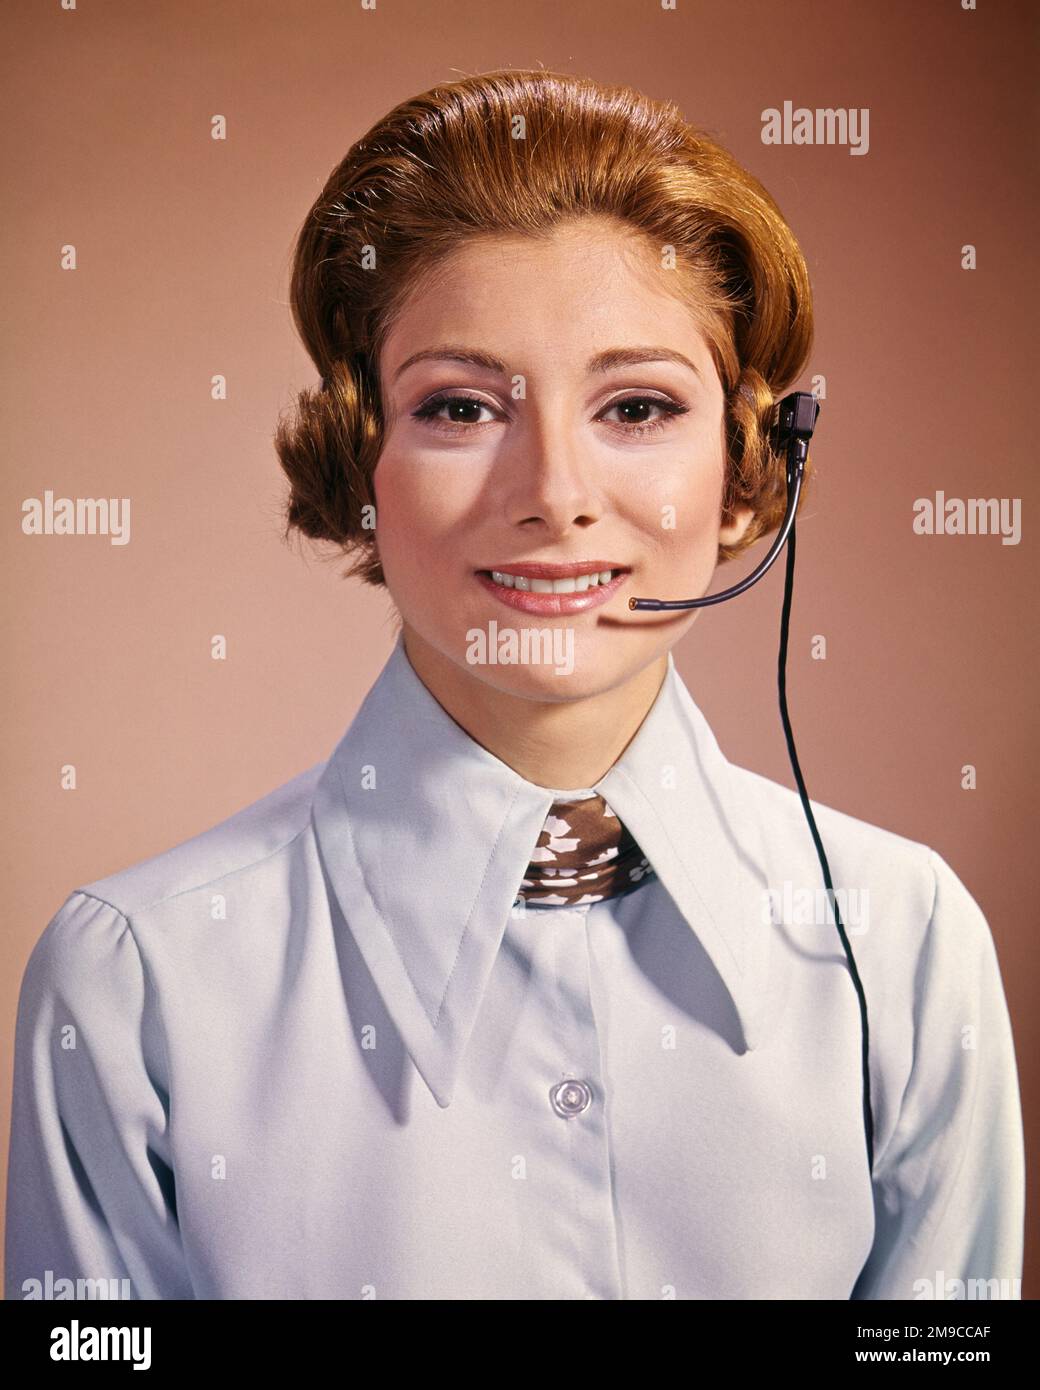 1960s 1970s SMILING WOMAN WEARING TELEPHONE HEADSET OFFICE RECEPTIONIST CALL CENTER SALESPERSON LOOKING AT CAMERA - kg3449 HAR001 HARS STYLE COMMUNICATION CENTER INFORMATION PLEASED JOY LIFESTYLE SALESPERSON CALL FEMALES JOBS STUDIO SHOT COMMUNICATING COPY SPACE LADIES PERSONS CONFIDENCE HEADSET EYE CONTACT SKILL OCCUPATION SELLING SKILLS OPERATOR HEAD AND SHOULDERS CHEERFUL LEADERSHIP REDHEAD PRIDE SUPERVISOR OCCUPATIONS PHONES SMILES RED HAIR TELEPHONES JOYFUL SALESWOMAN SALESWOMEN STYLISH CALM COOPERATION MID-ADULT MID-ADULT WOMAN CAUCASIAN ETHNICITY HAR001 OLD FASHIONED Stock Photo